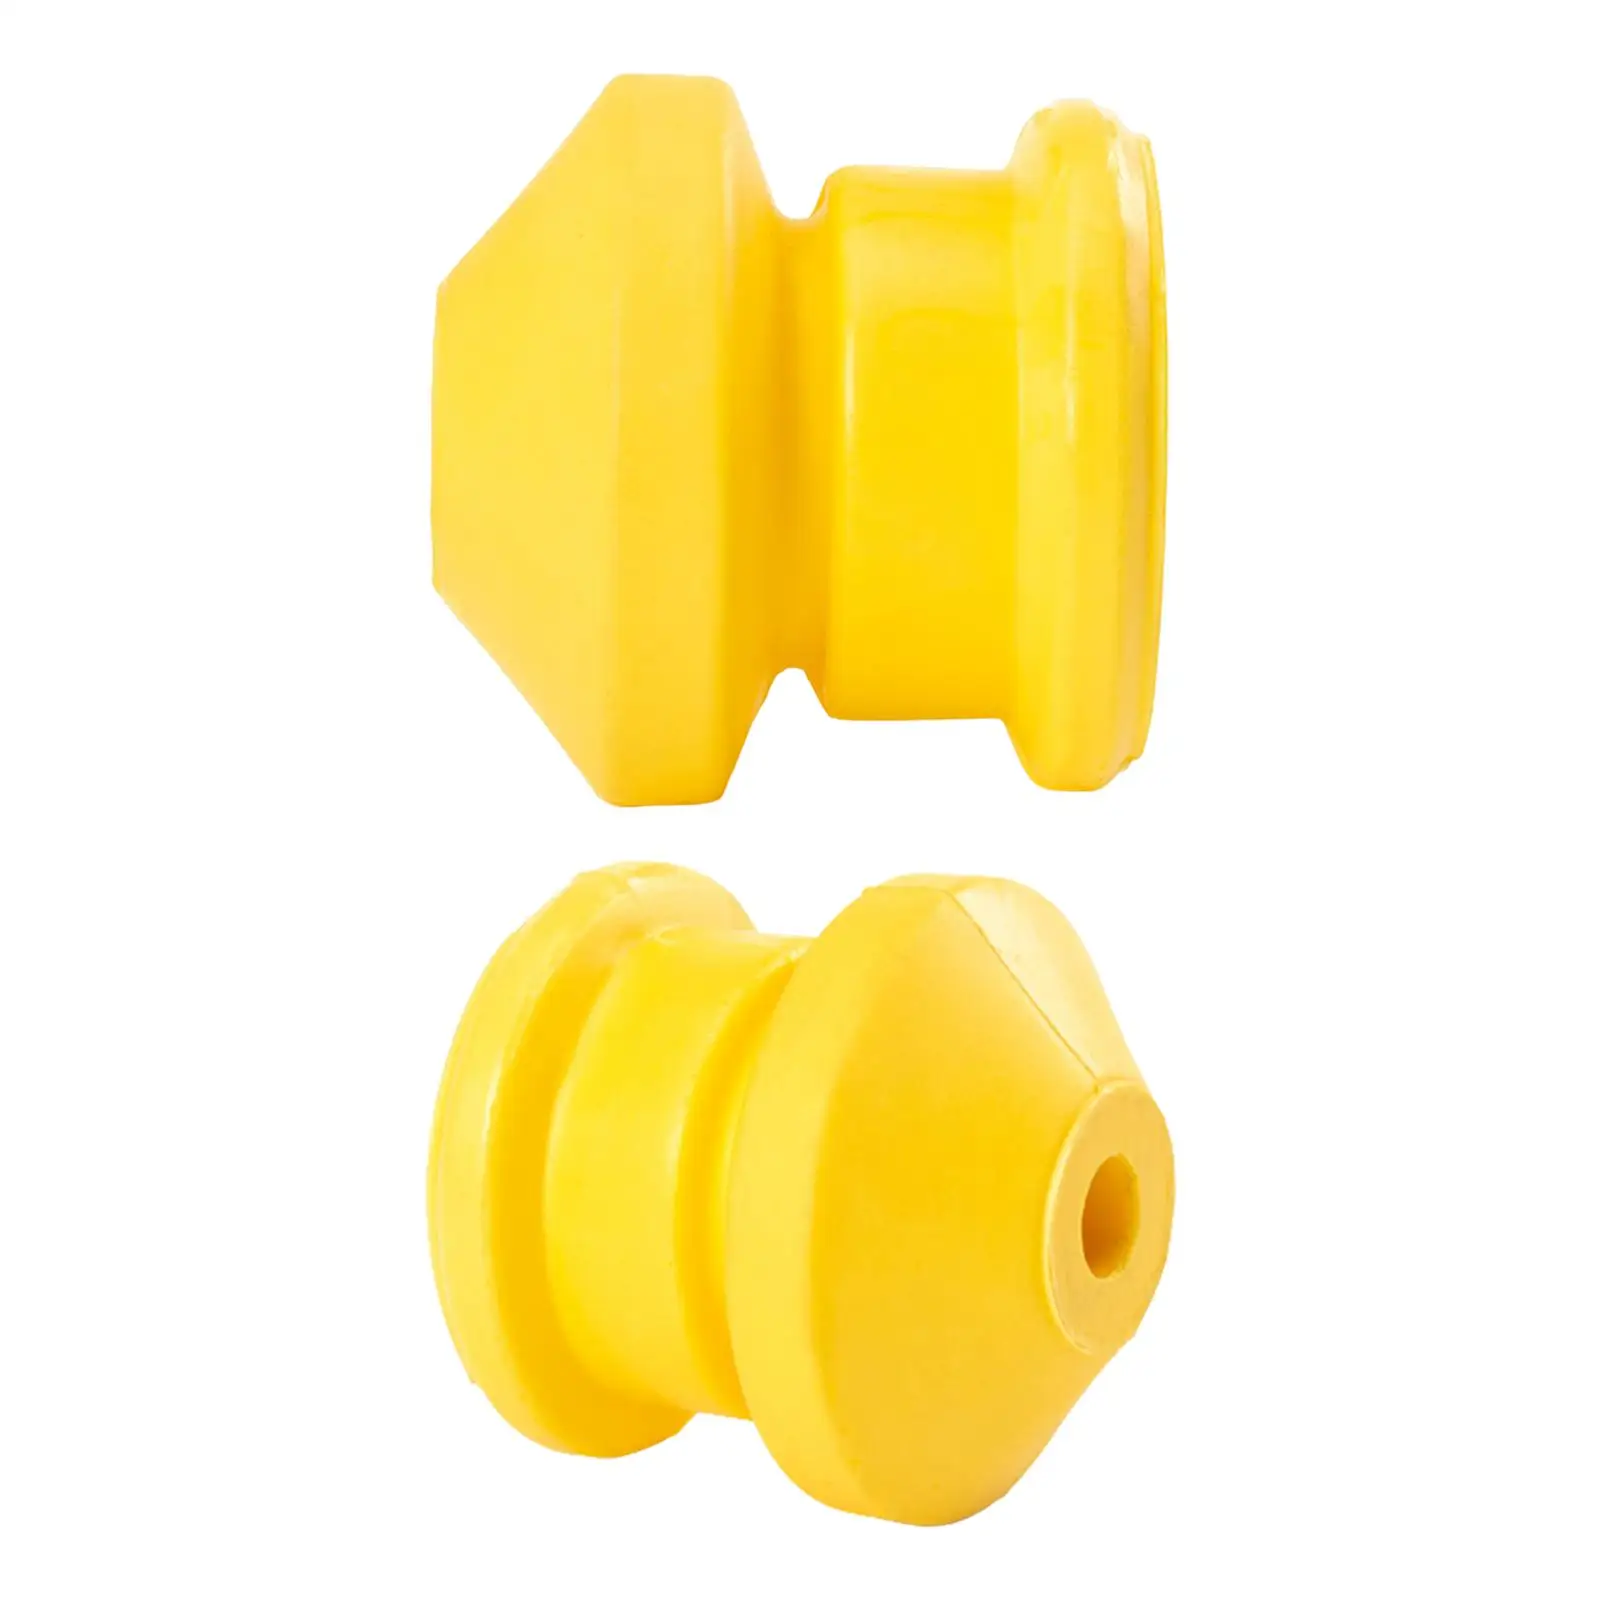 2x Bumper Stop Absorber 15783030 Accessory Buffer Block Durable Replace Professional Rubber Buffer for Hummer H3 2006-2010